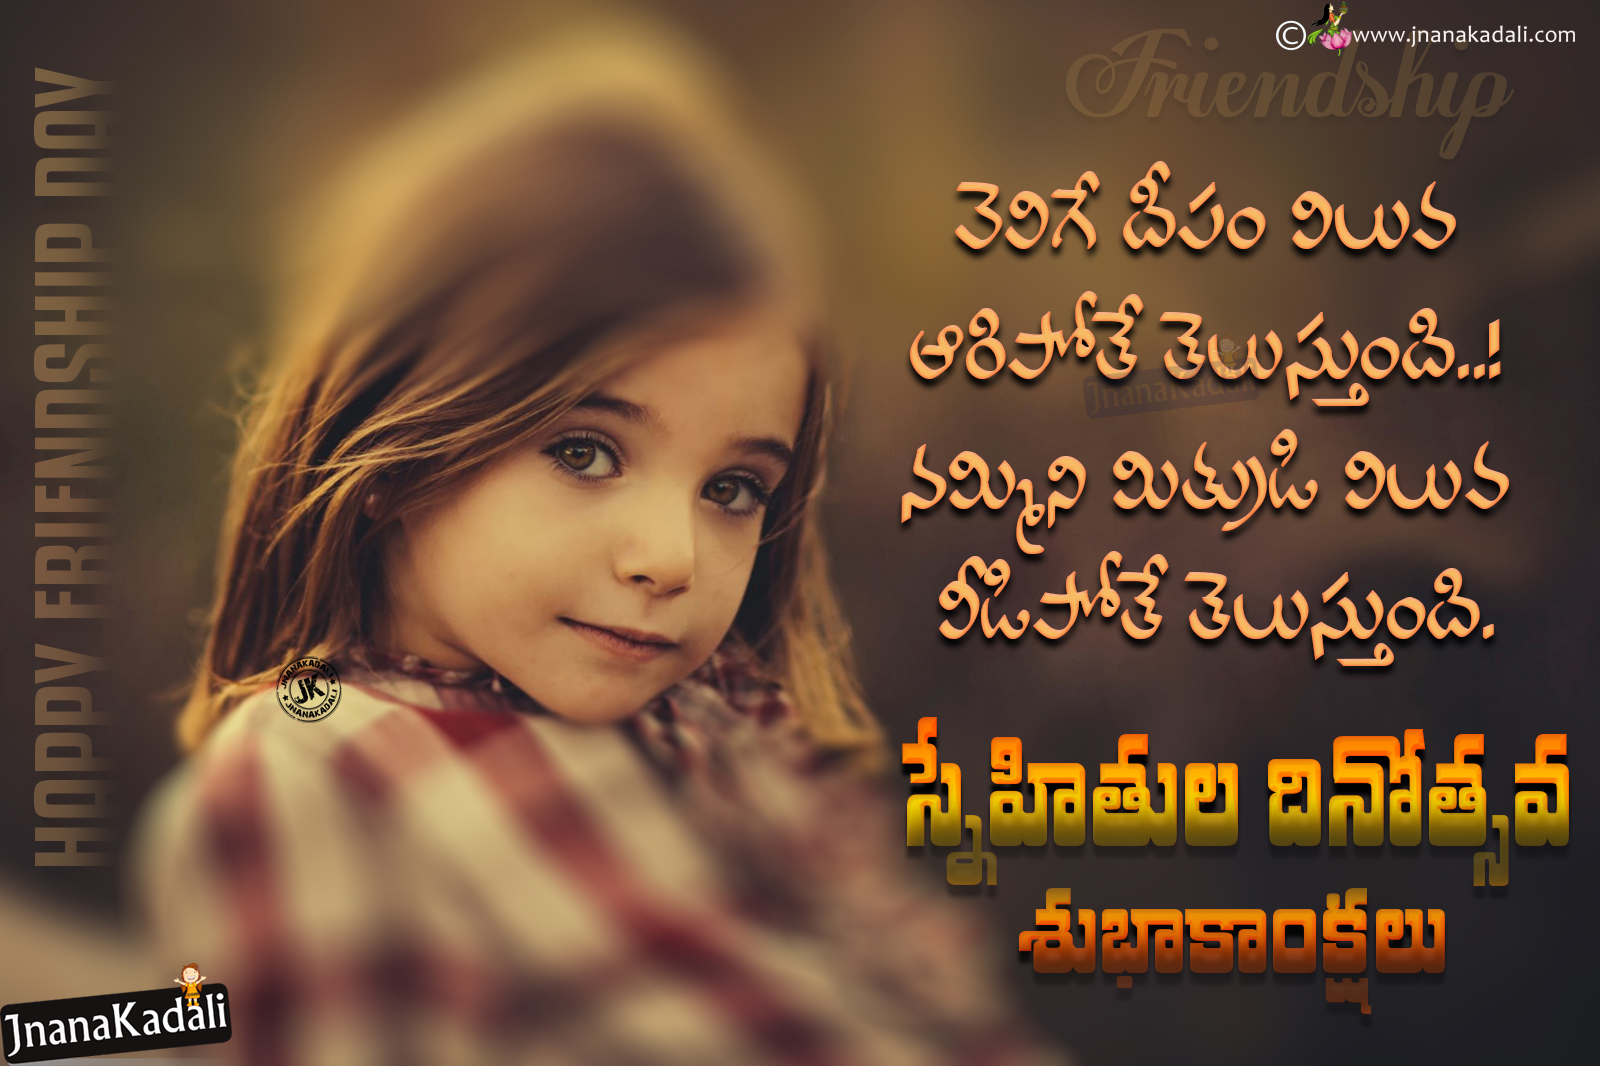 Whats App Sharing Friendship Day Greetings Quotations in Telugu ...